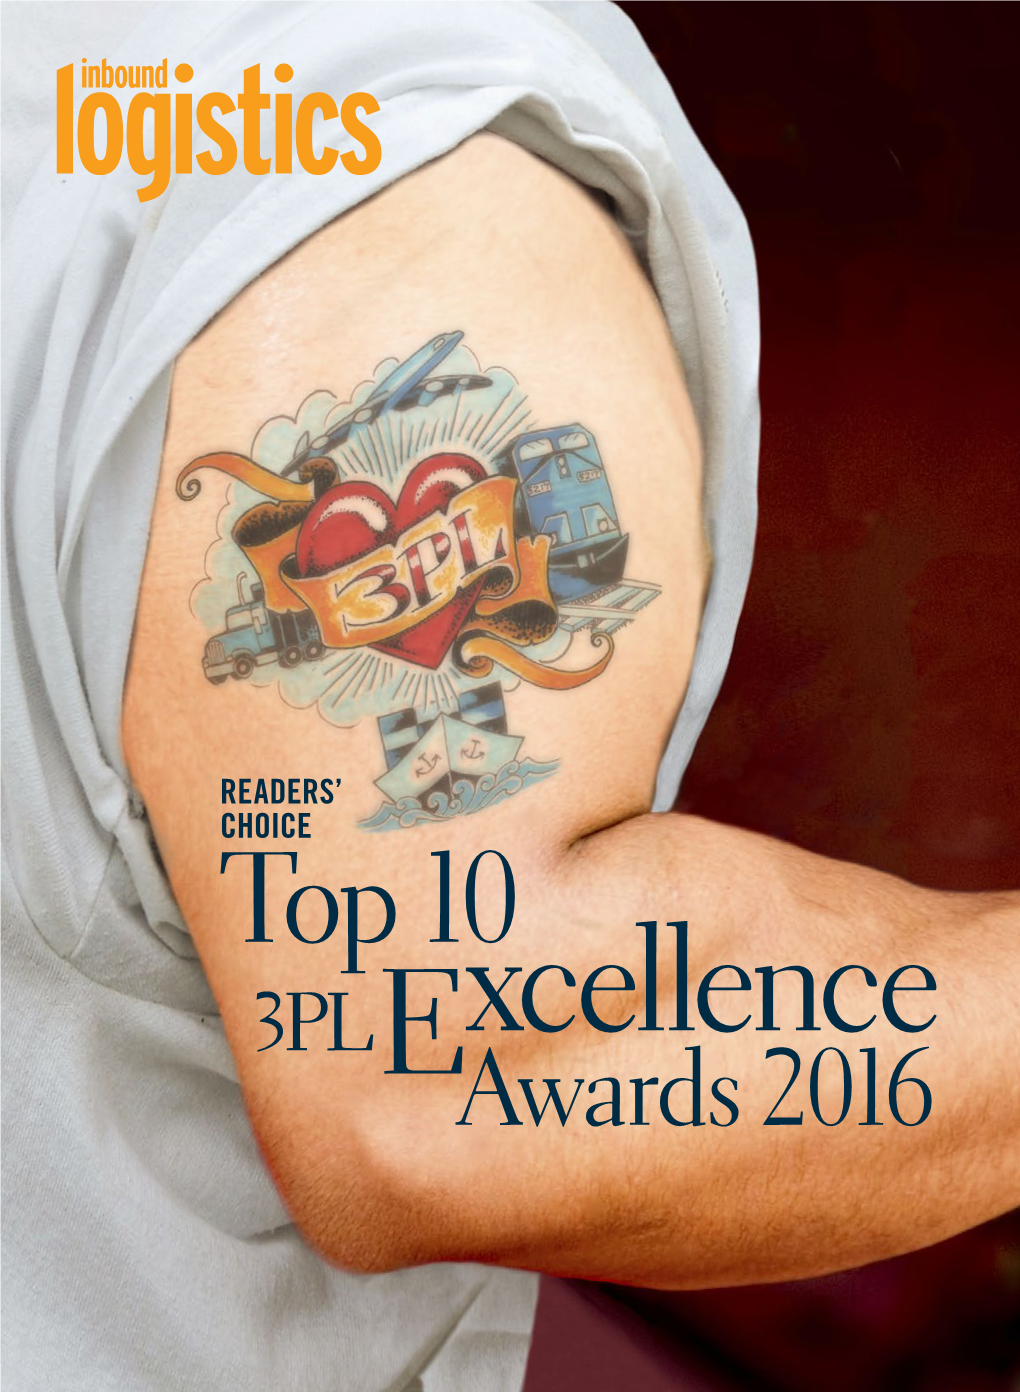 Top 10 3PL Excellence Awards 2016